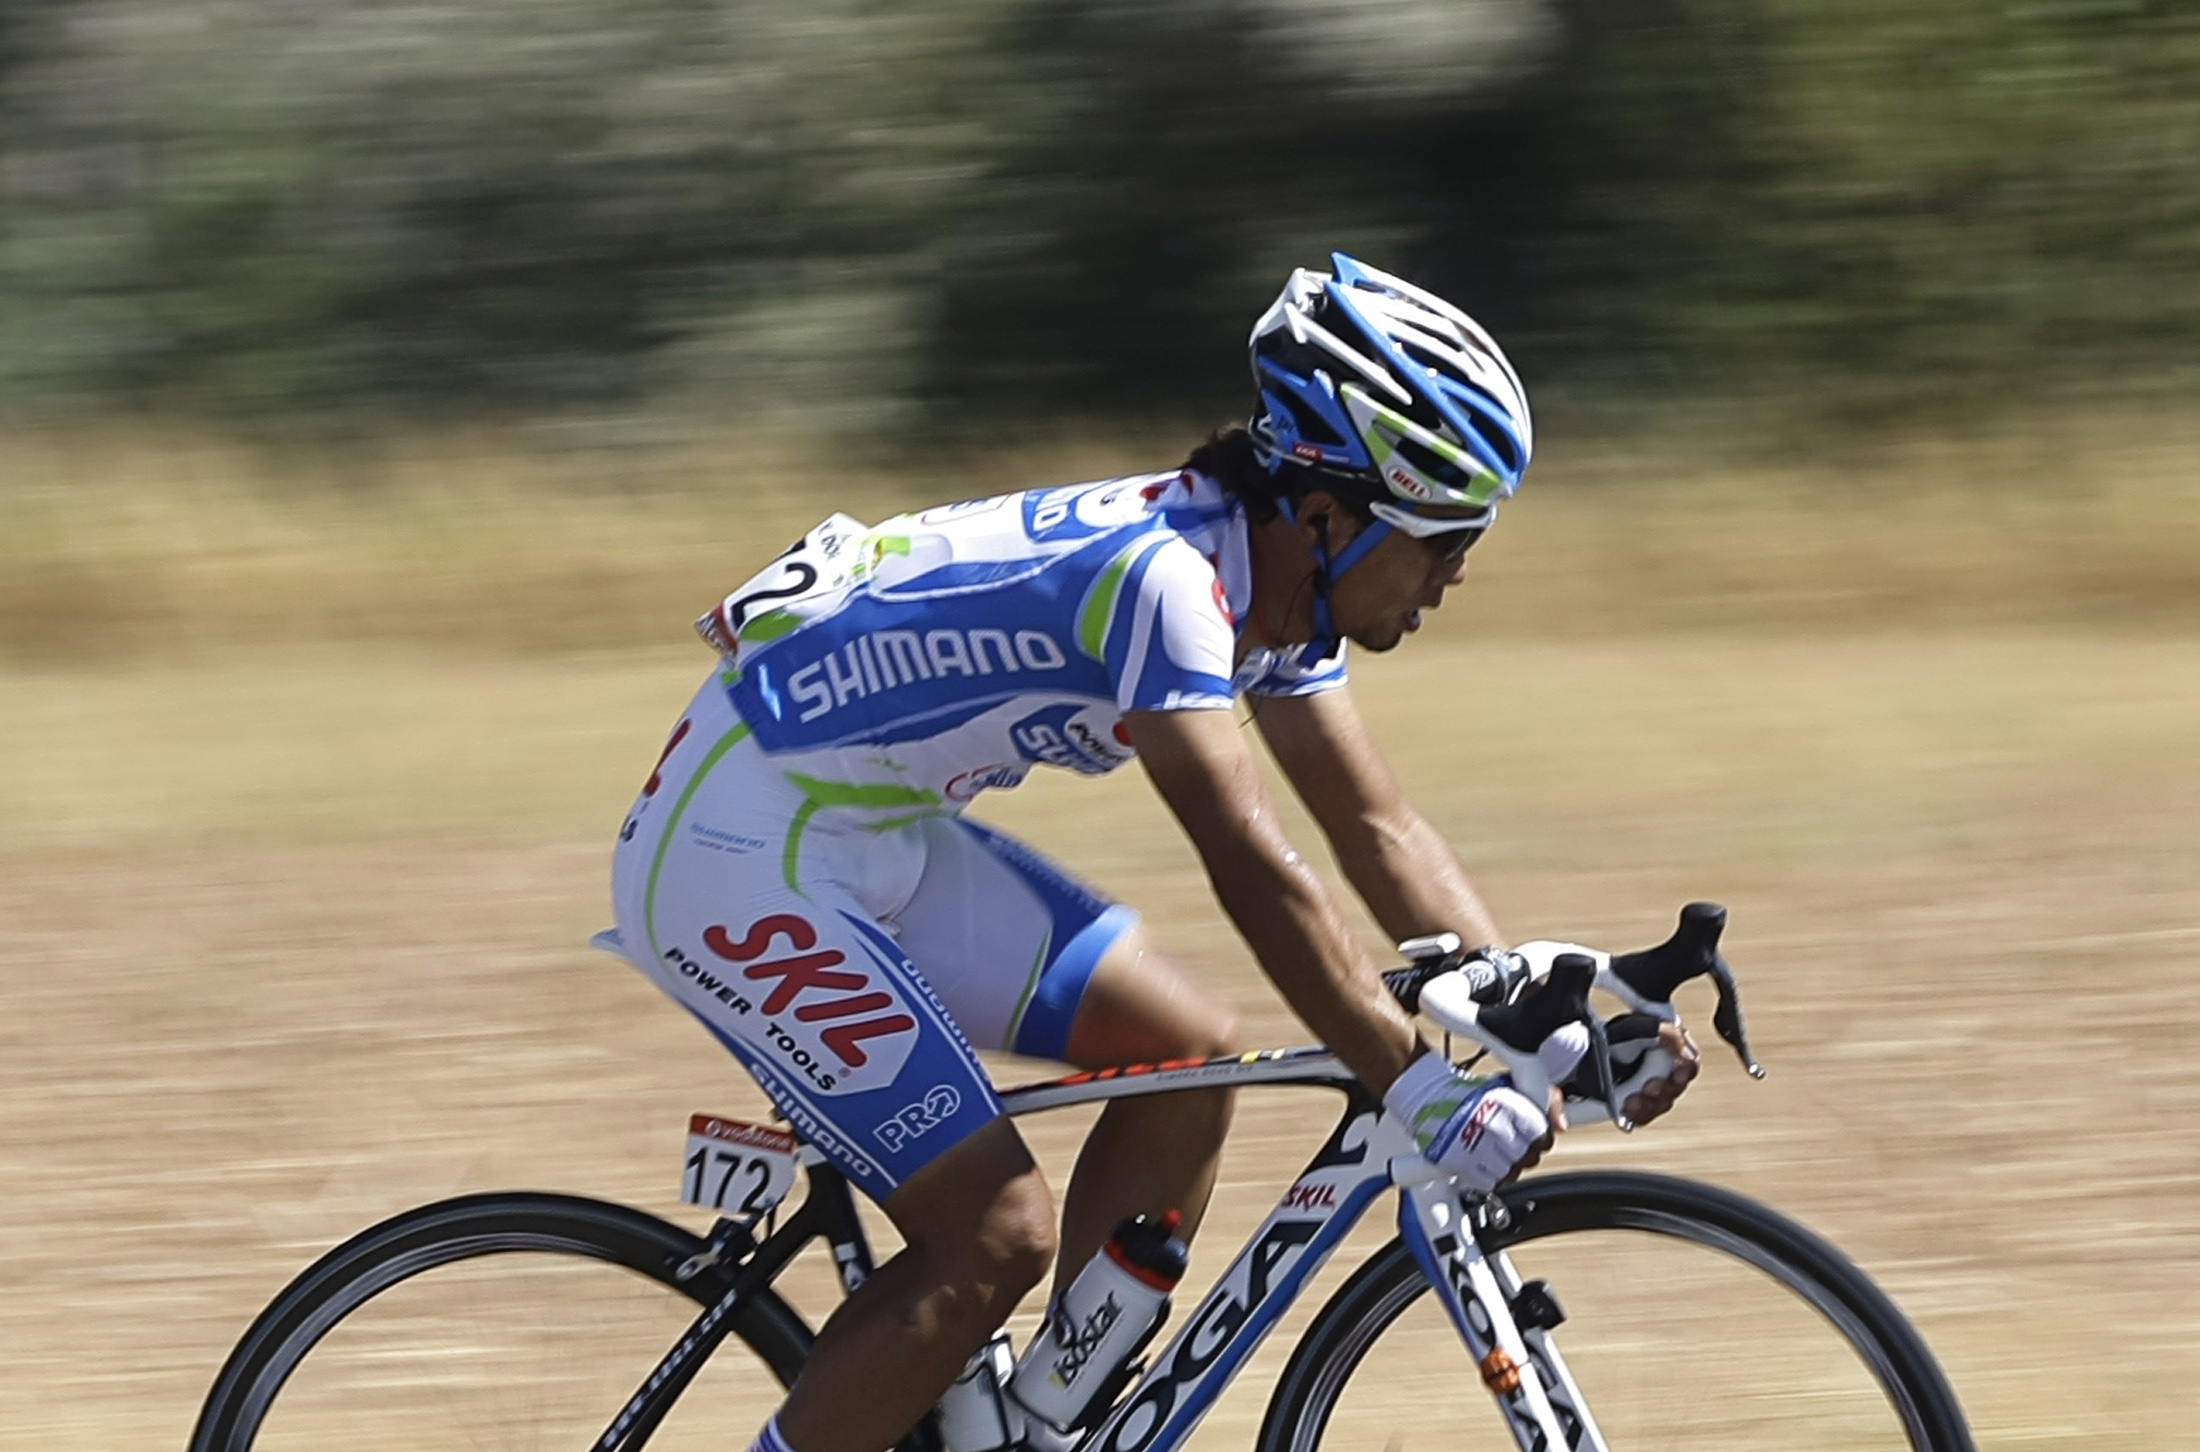 Skil Shimano's rider Yukihiro Doi of Japan cycles during the sixth stage of the Tour of Spain 